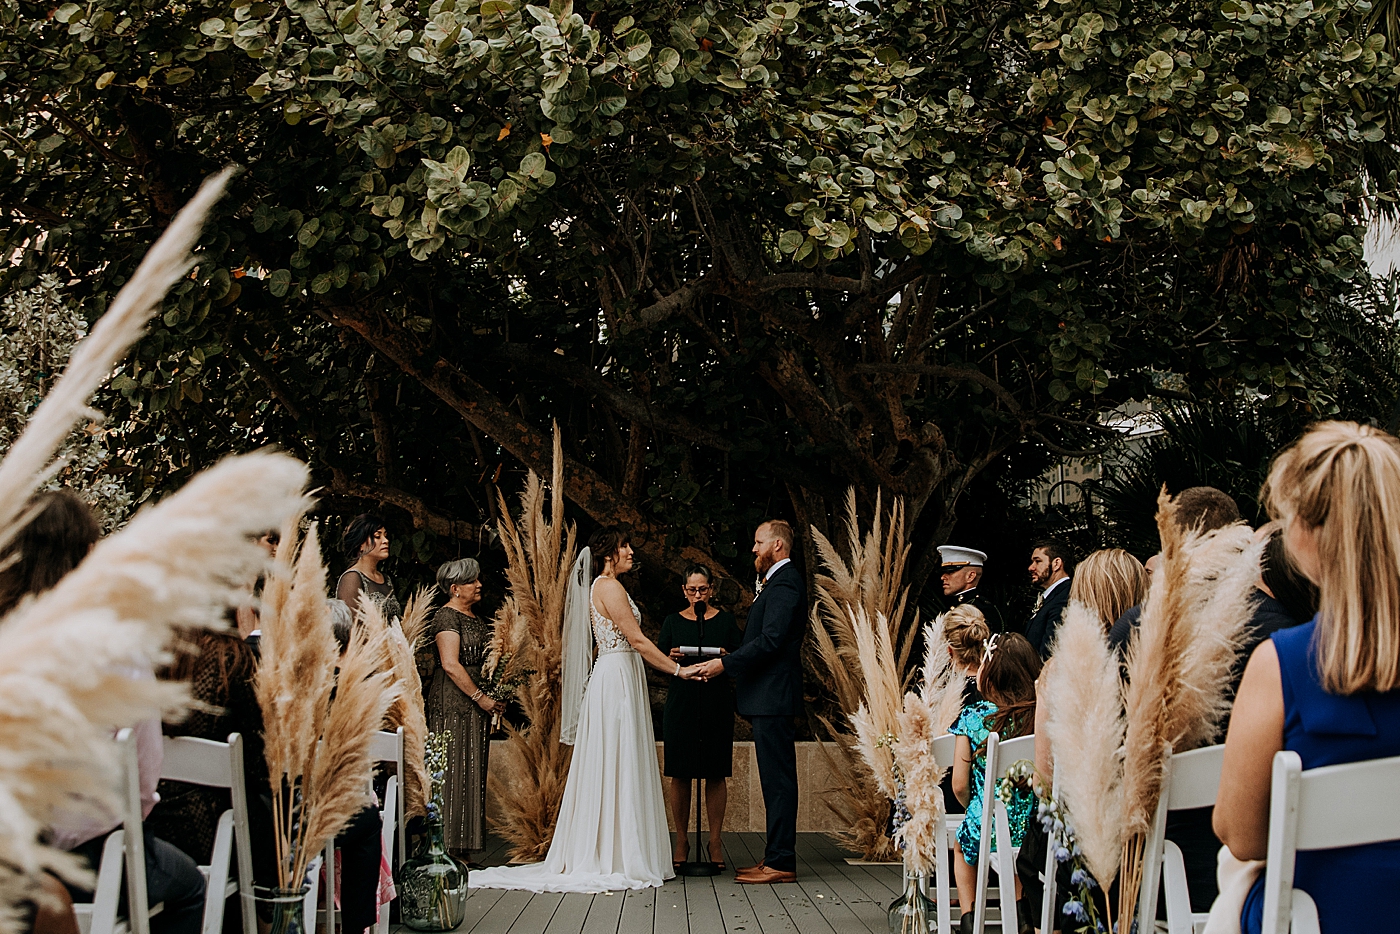 Bride and Groom exchanging vows at Ceremony Historic Stranahan House Wedding Photography captured by South Florida Wedding Photographer Maggie Alvarez Photography